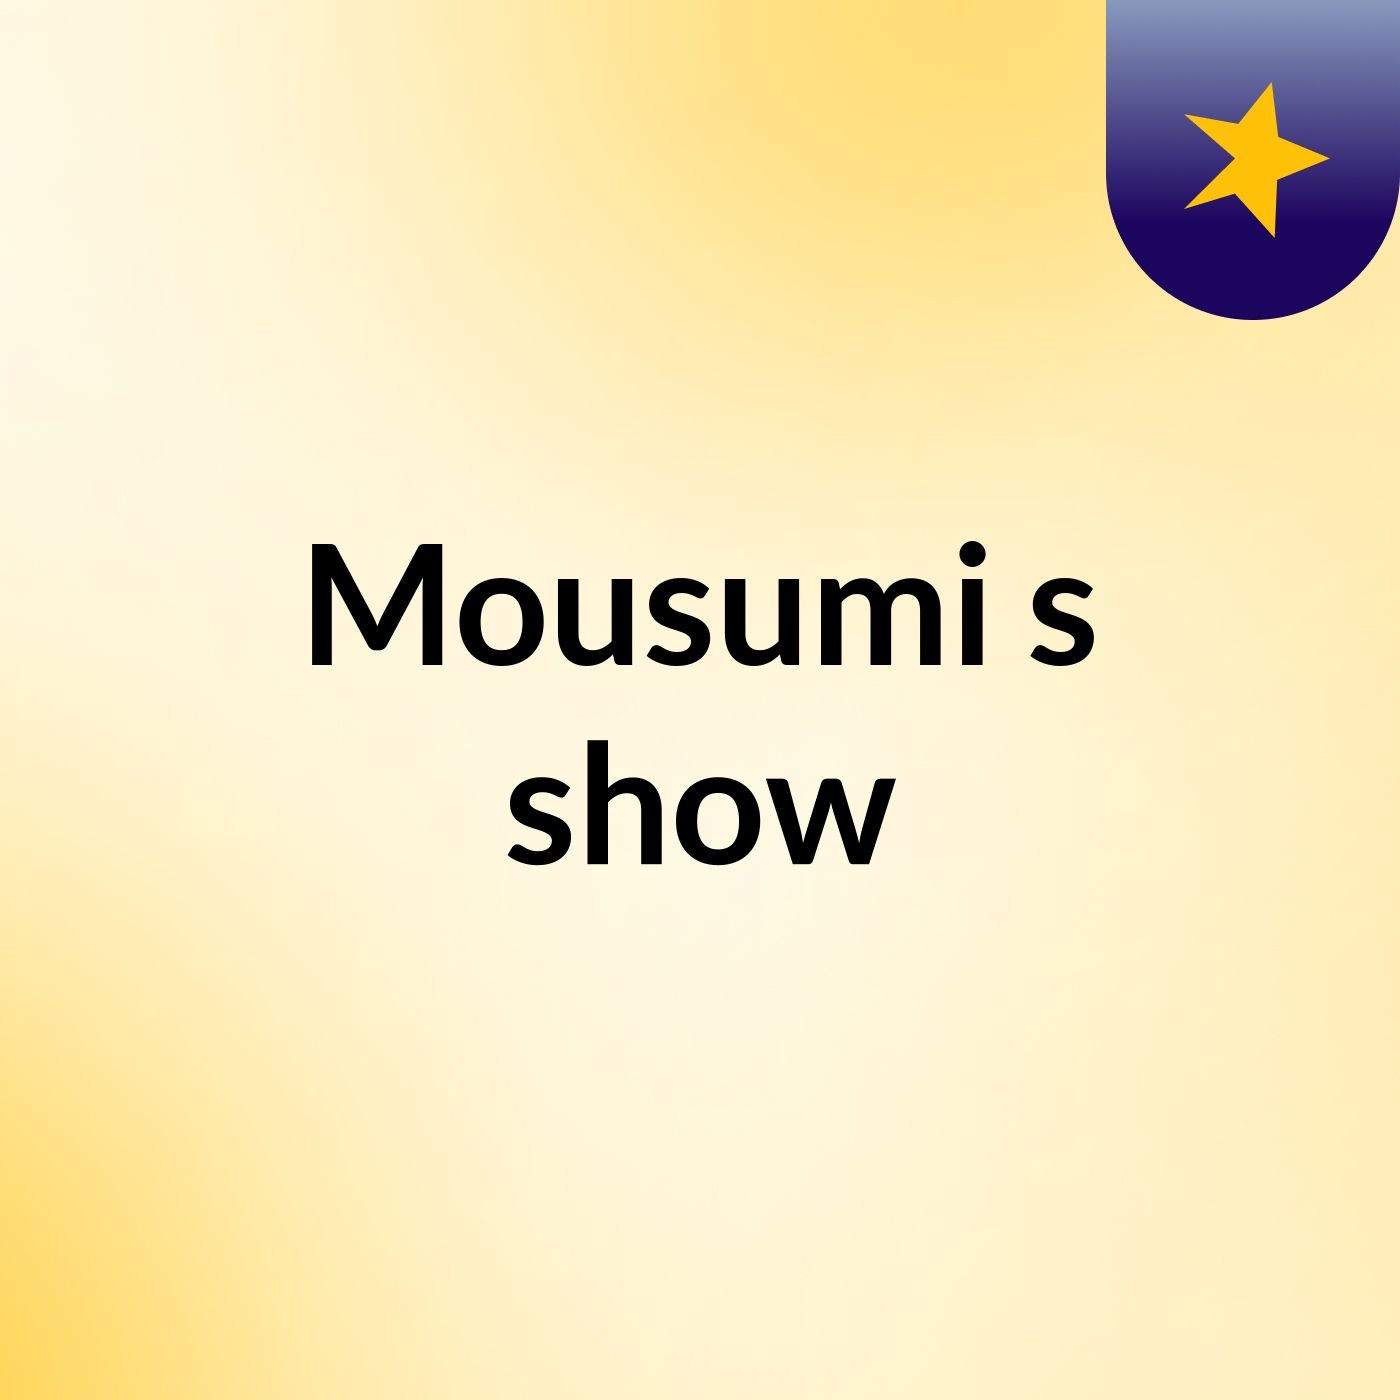 Mousumi's show